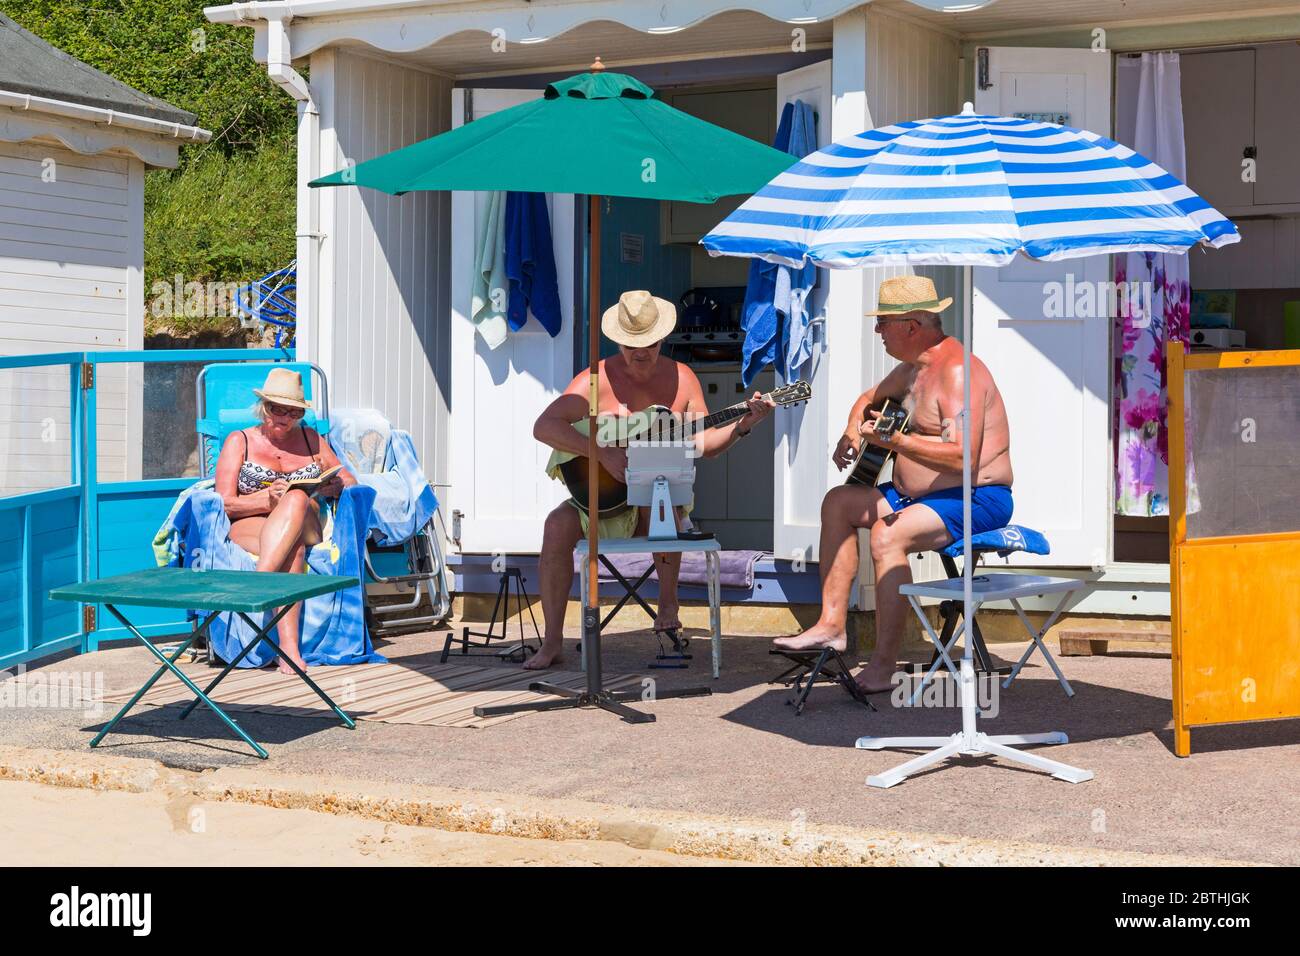 Bournemouth, Dorset UK. 26th May 2020. UK weather: another hot sunny day at Bournemouth beaches with clear blue skies and unbroken sunshine, as the glorious weather continues and temperatures rise. Sunseekers head to the seaside to enjoy the sunshine. Time for some music. Credit: Carolyn Jenkins/Alamy Live News Stock Photo